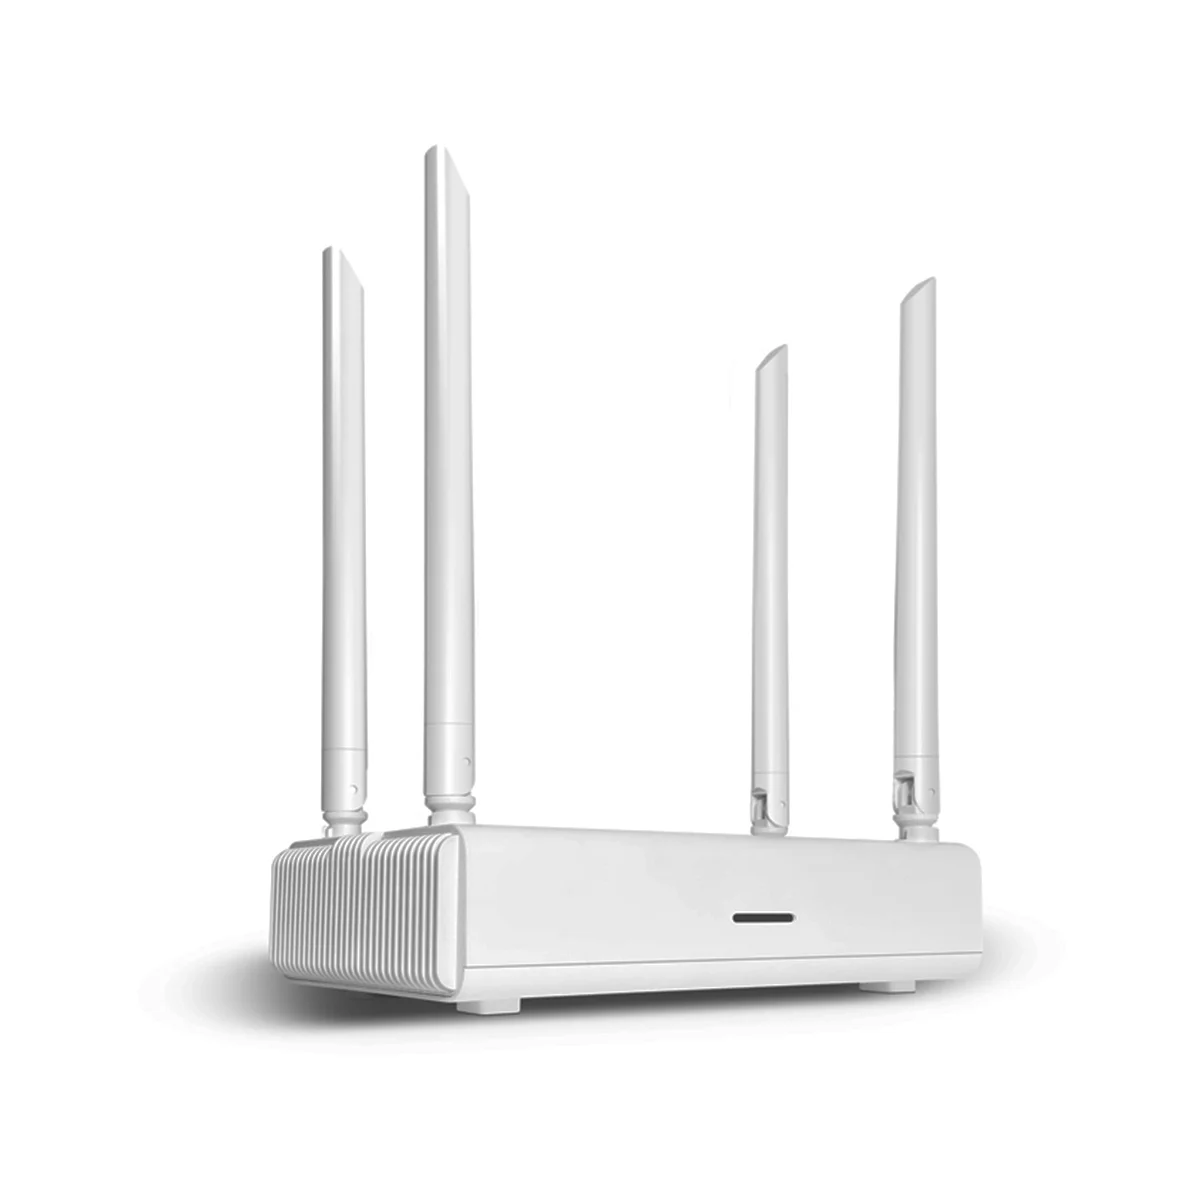 

1200M WiFi Router 2.4G+5.8G 802.11AC 4X1000Mbps Routing+Bridging Mode Support 64 Users 4 Antenna CPE EU Plug